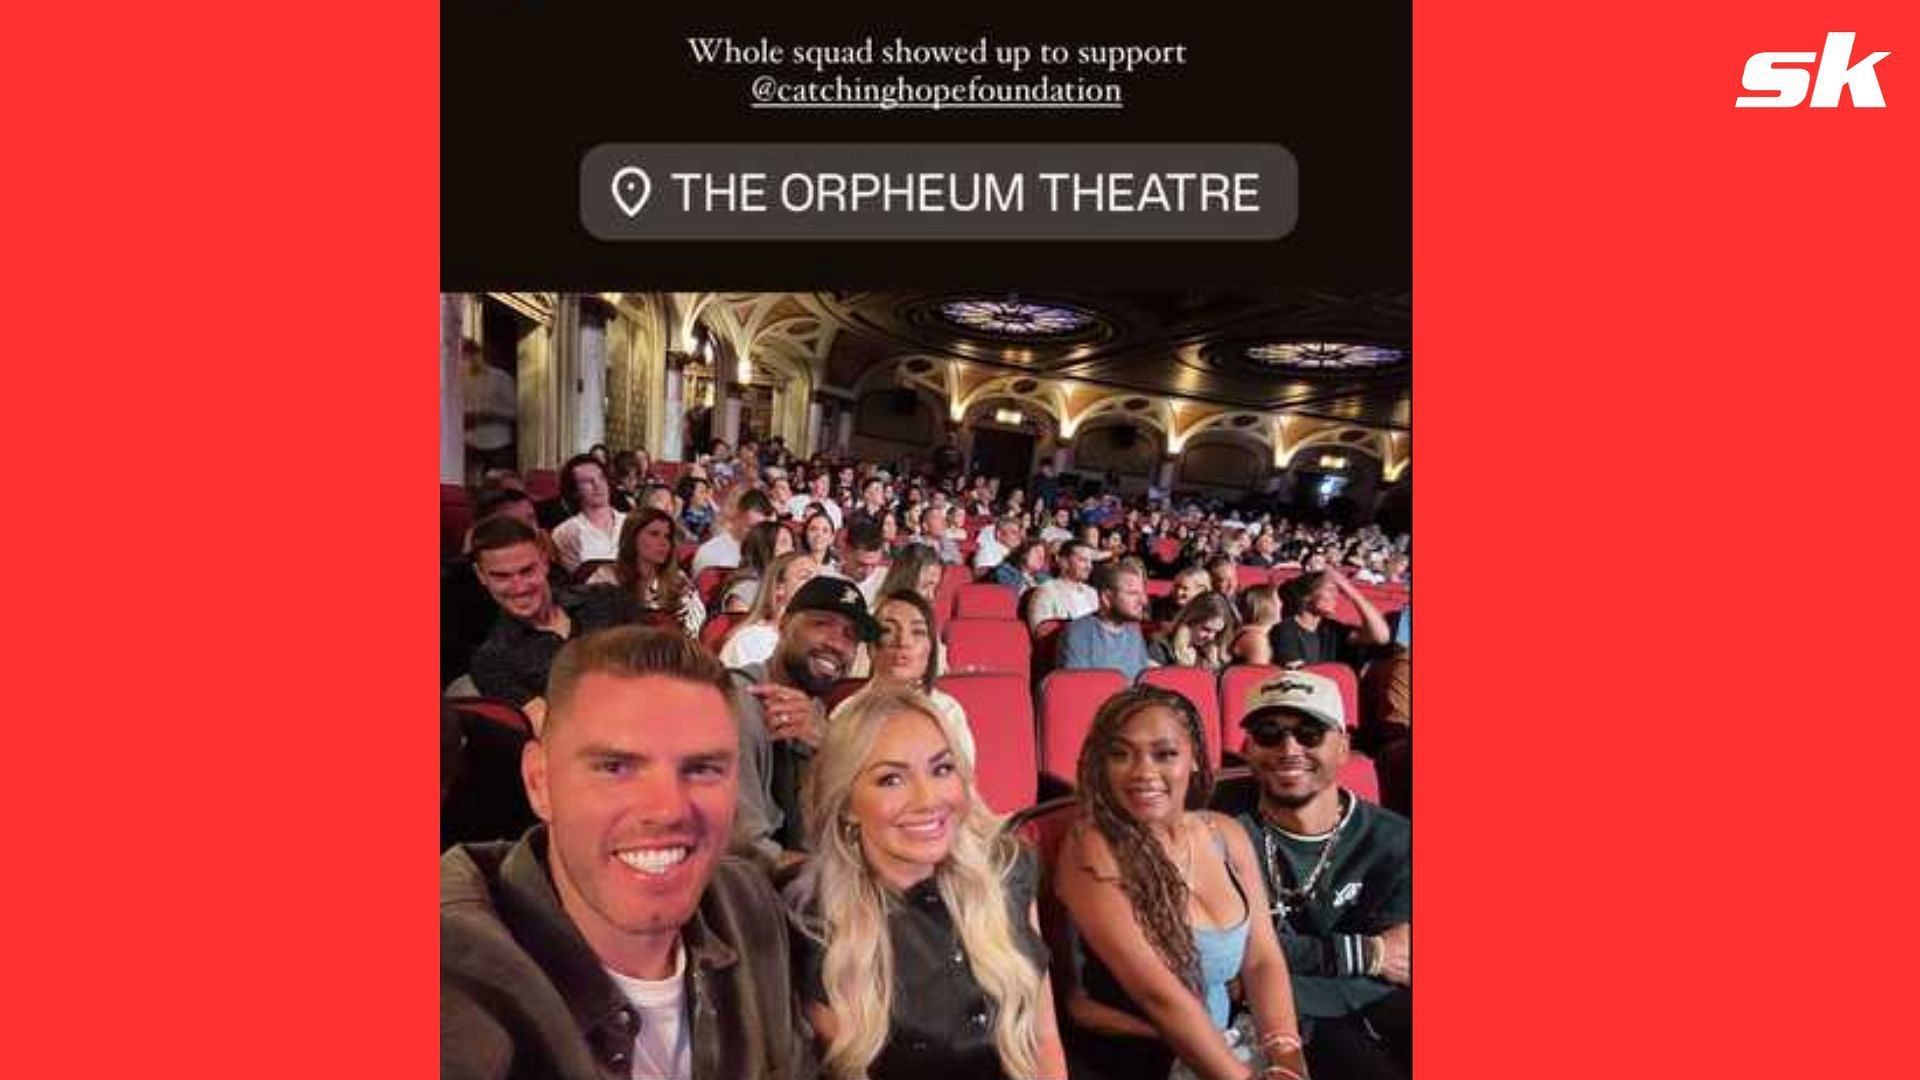 Chelsea Freeman captured a photo while hanging out with Freddie and teammates at the Orpheum Theatre